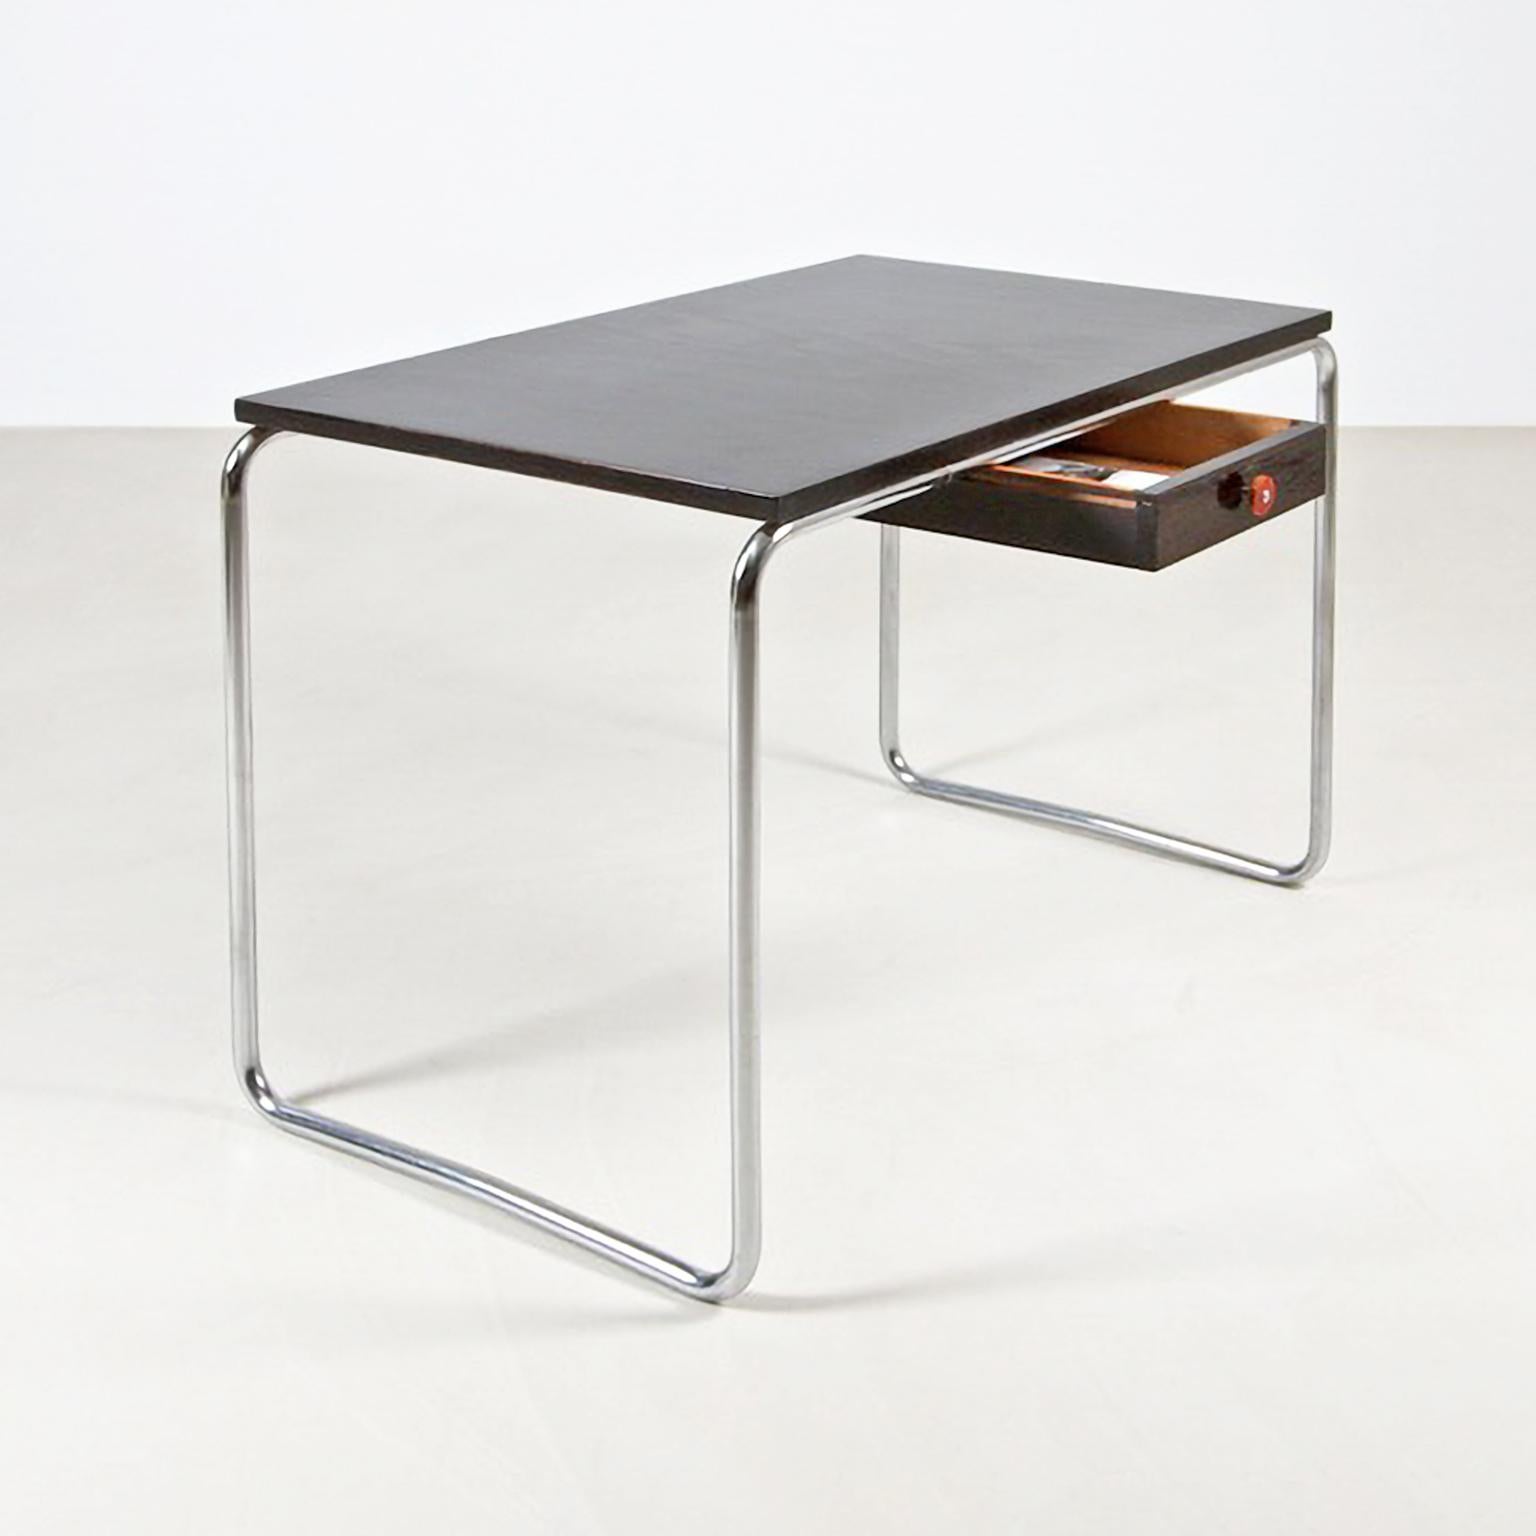 Bespoke modernist tubular writing table made of chrome plated tubular steel and lacquered wood.